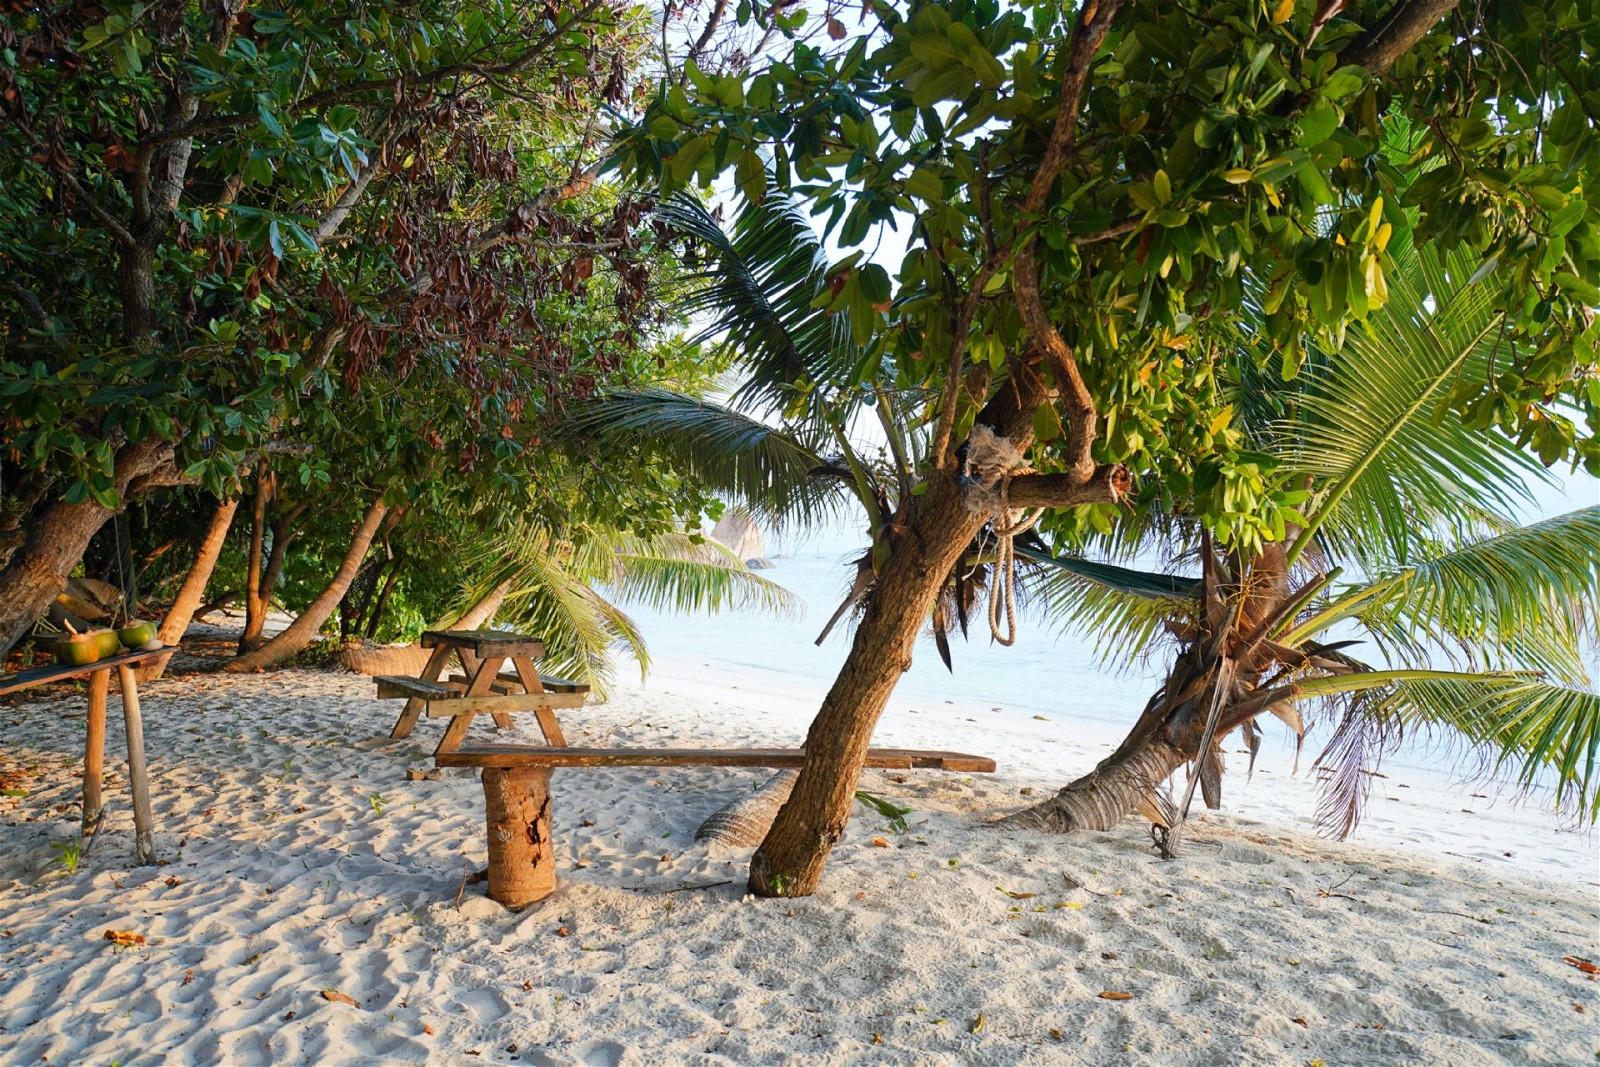 General Features of Anse Georgette 